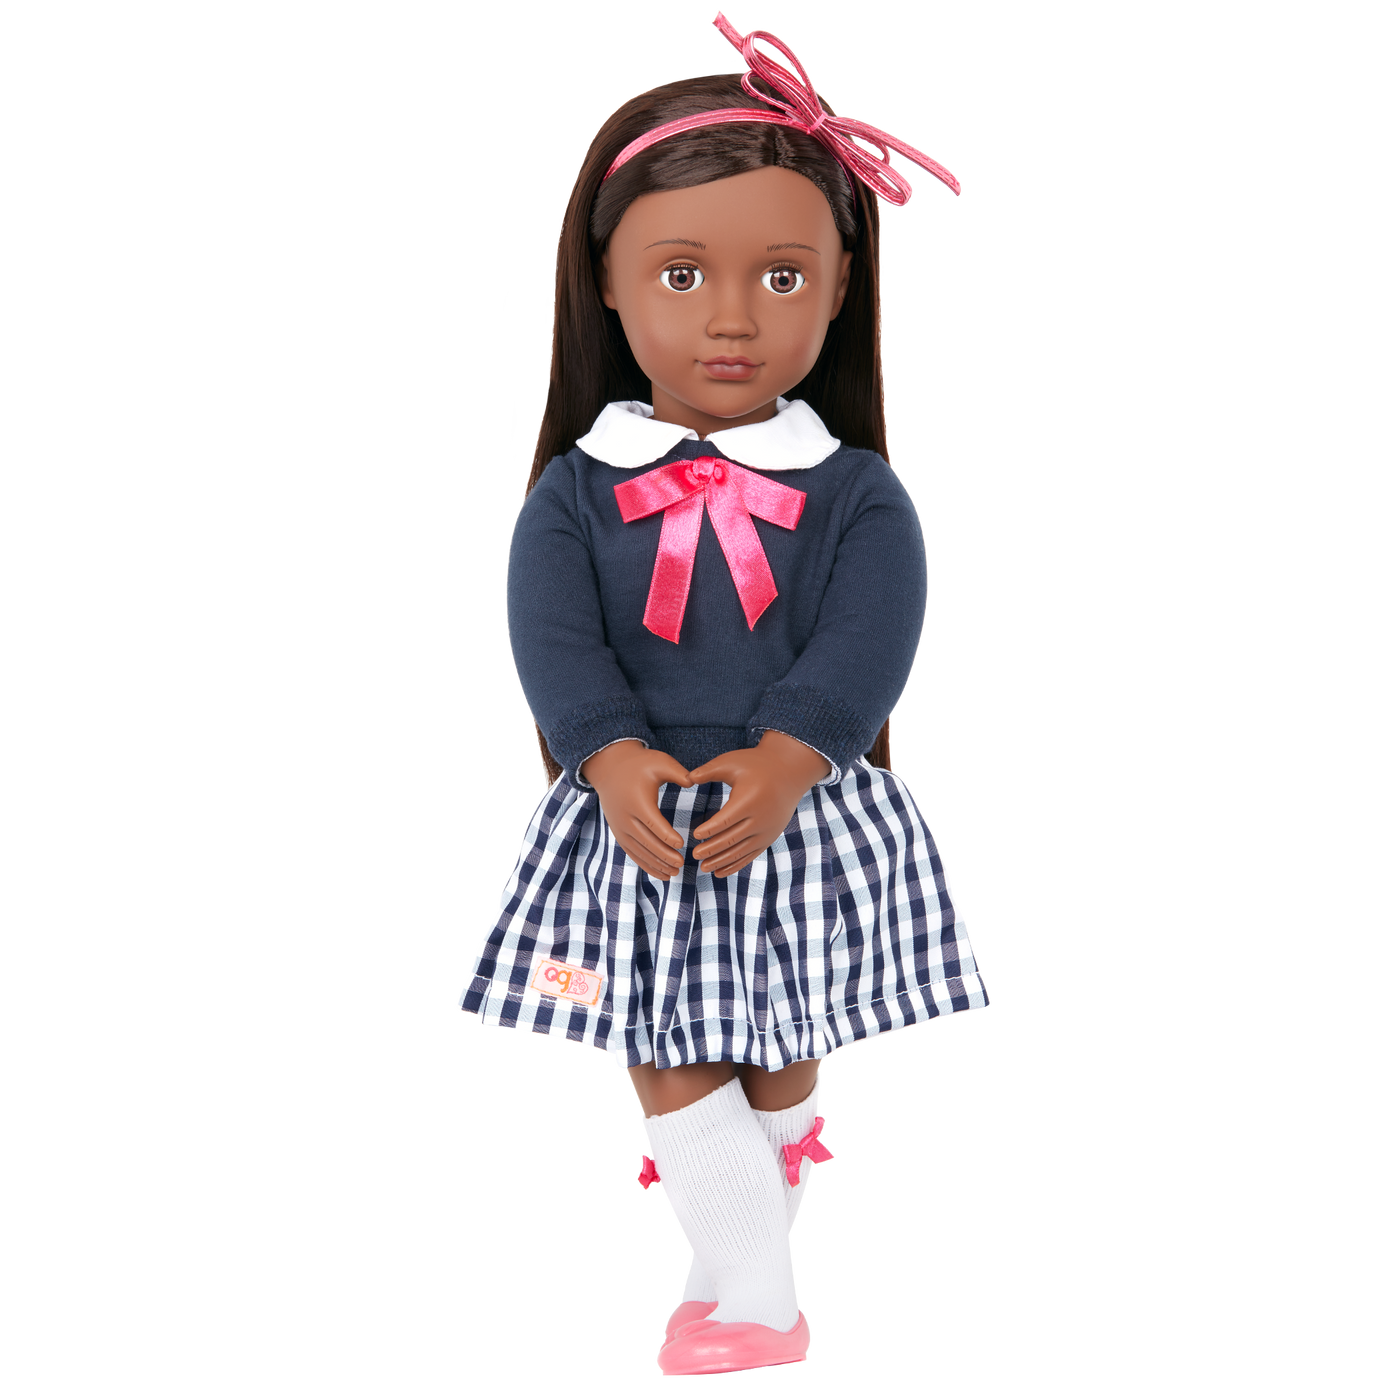 18-inch school doll with dark-brown hair and brown eyes